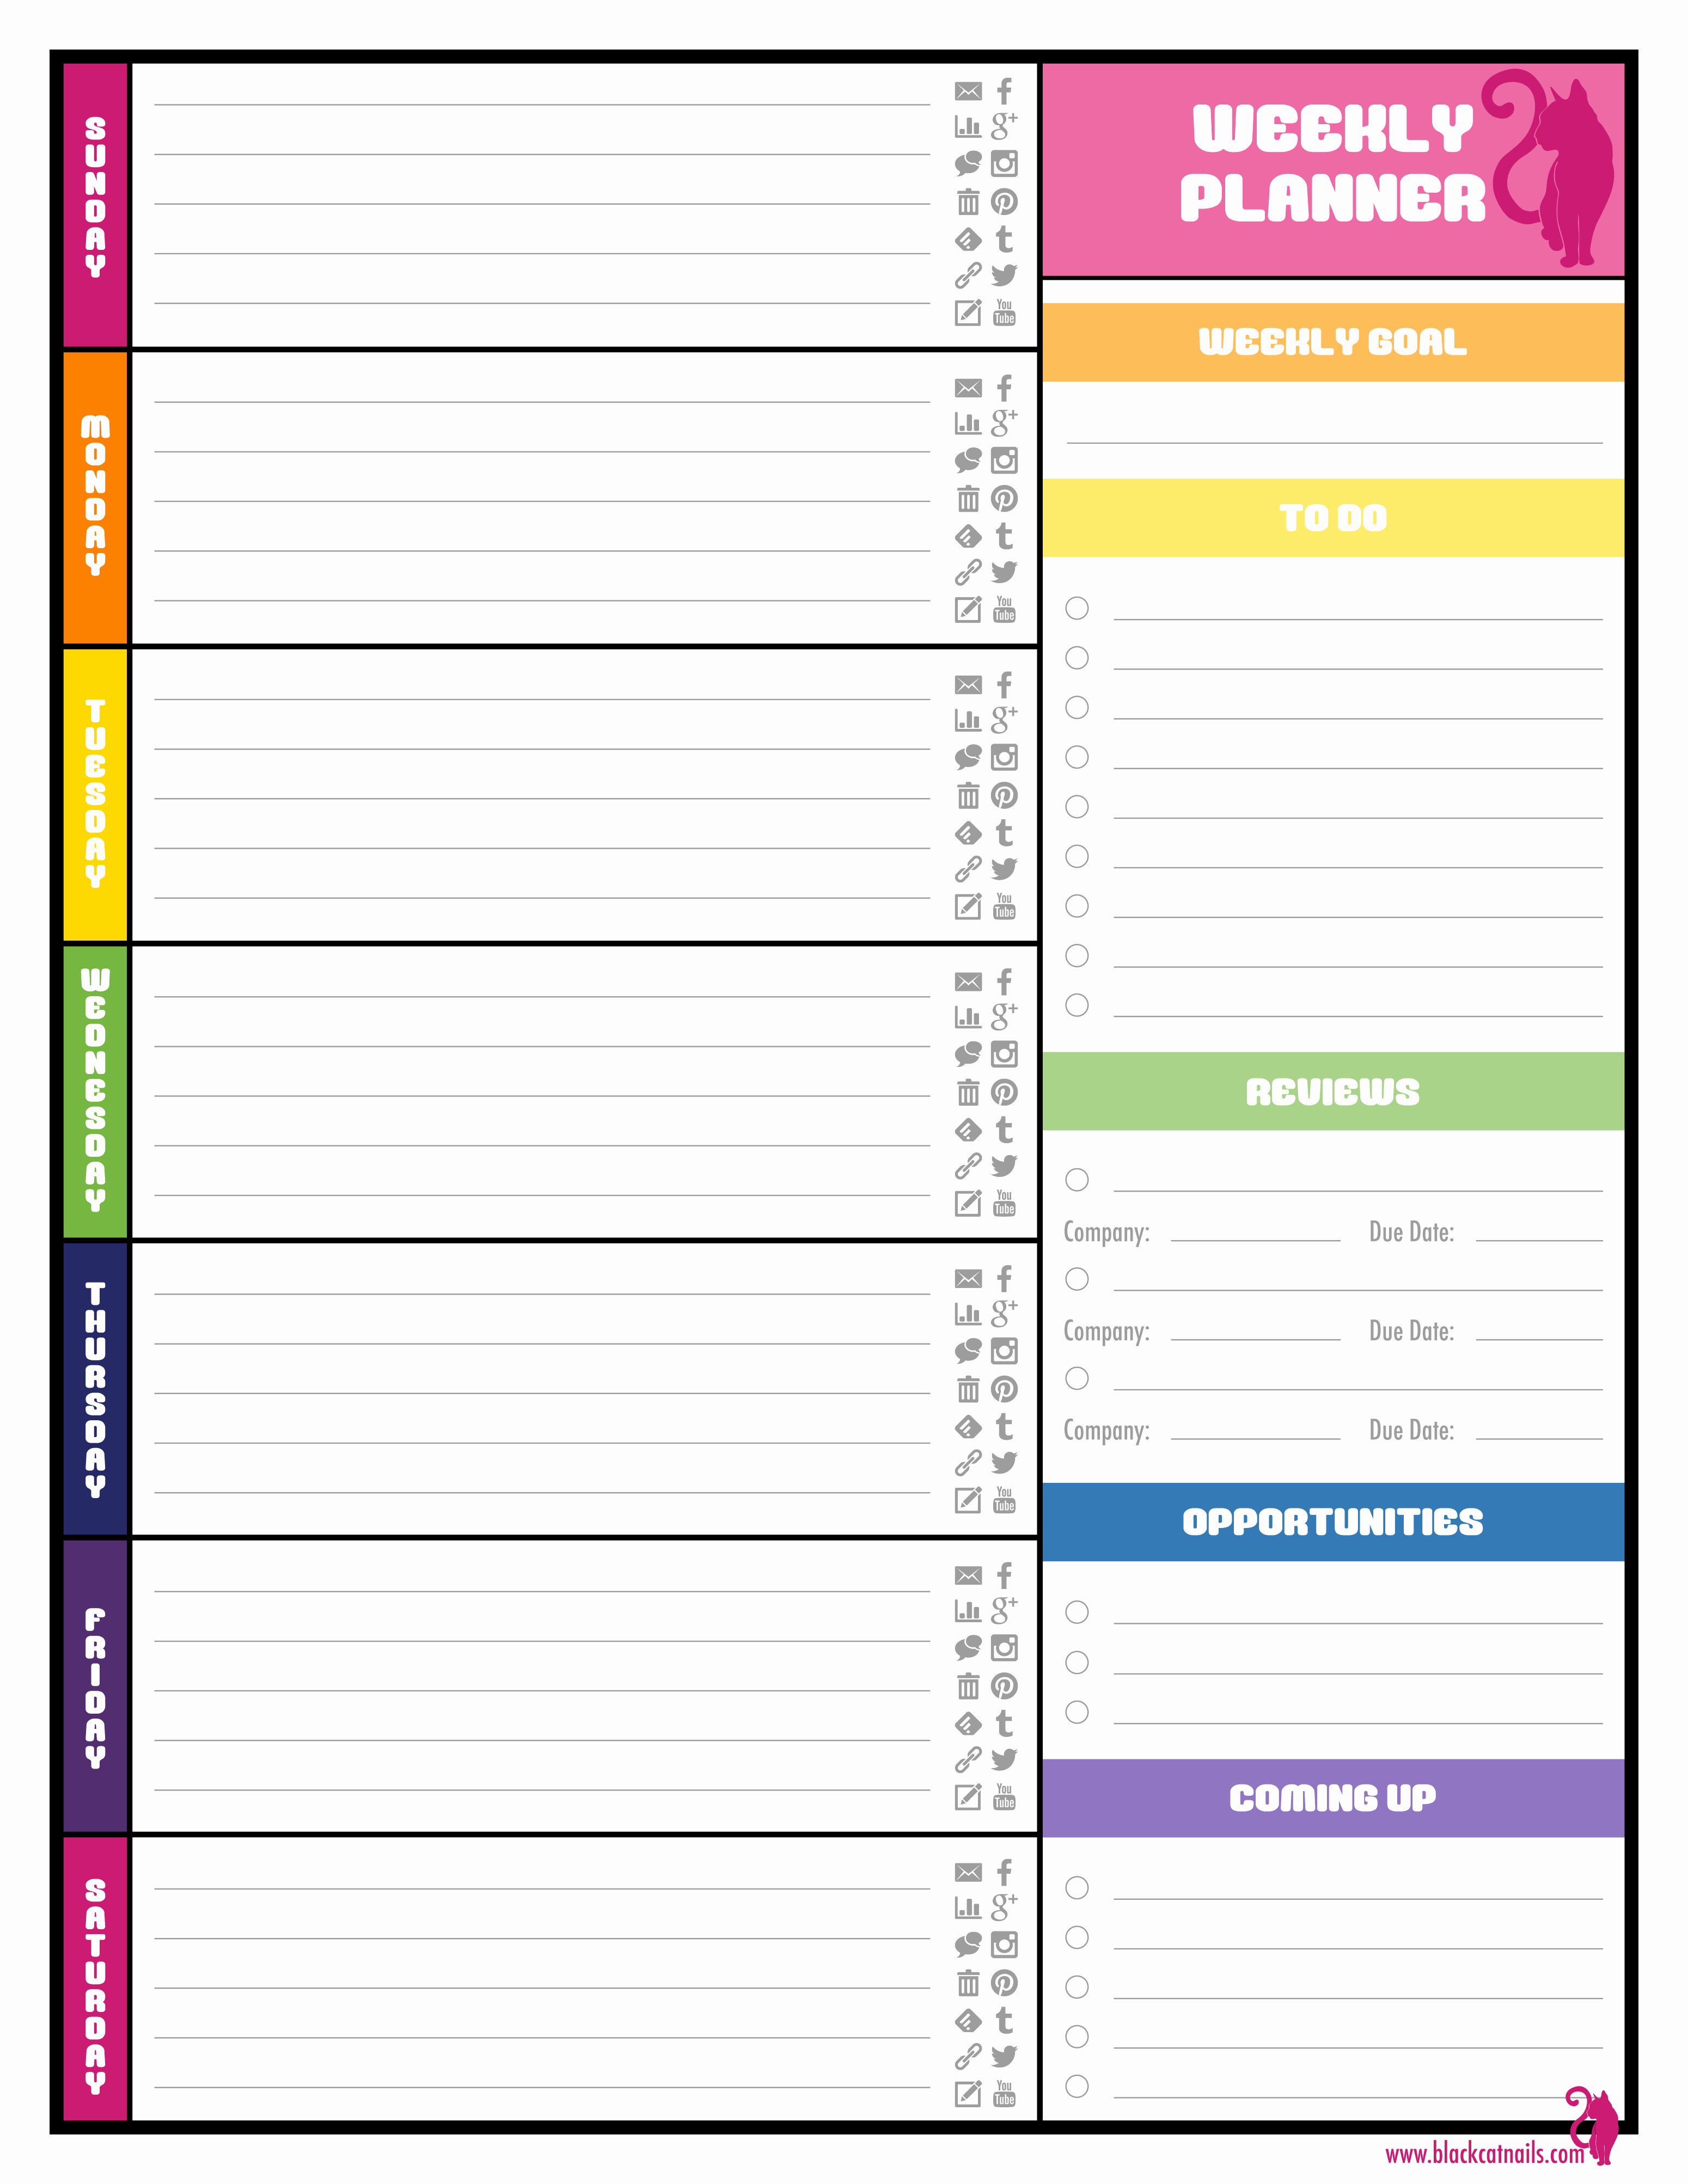 Weekly Planner Template Pdf Awesome Colorful Weekly Blogging Planner Image